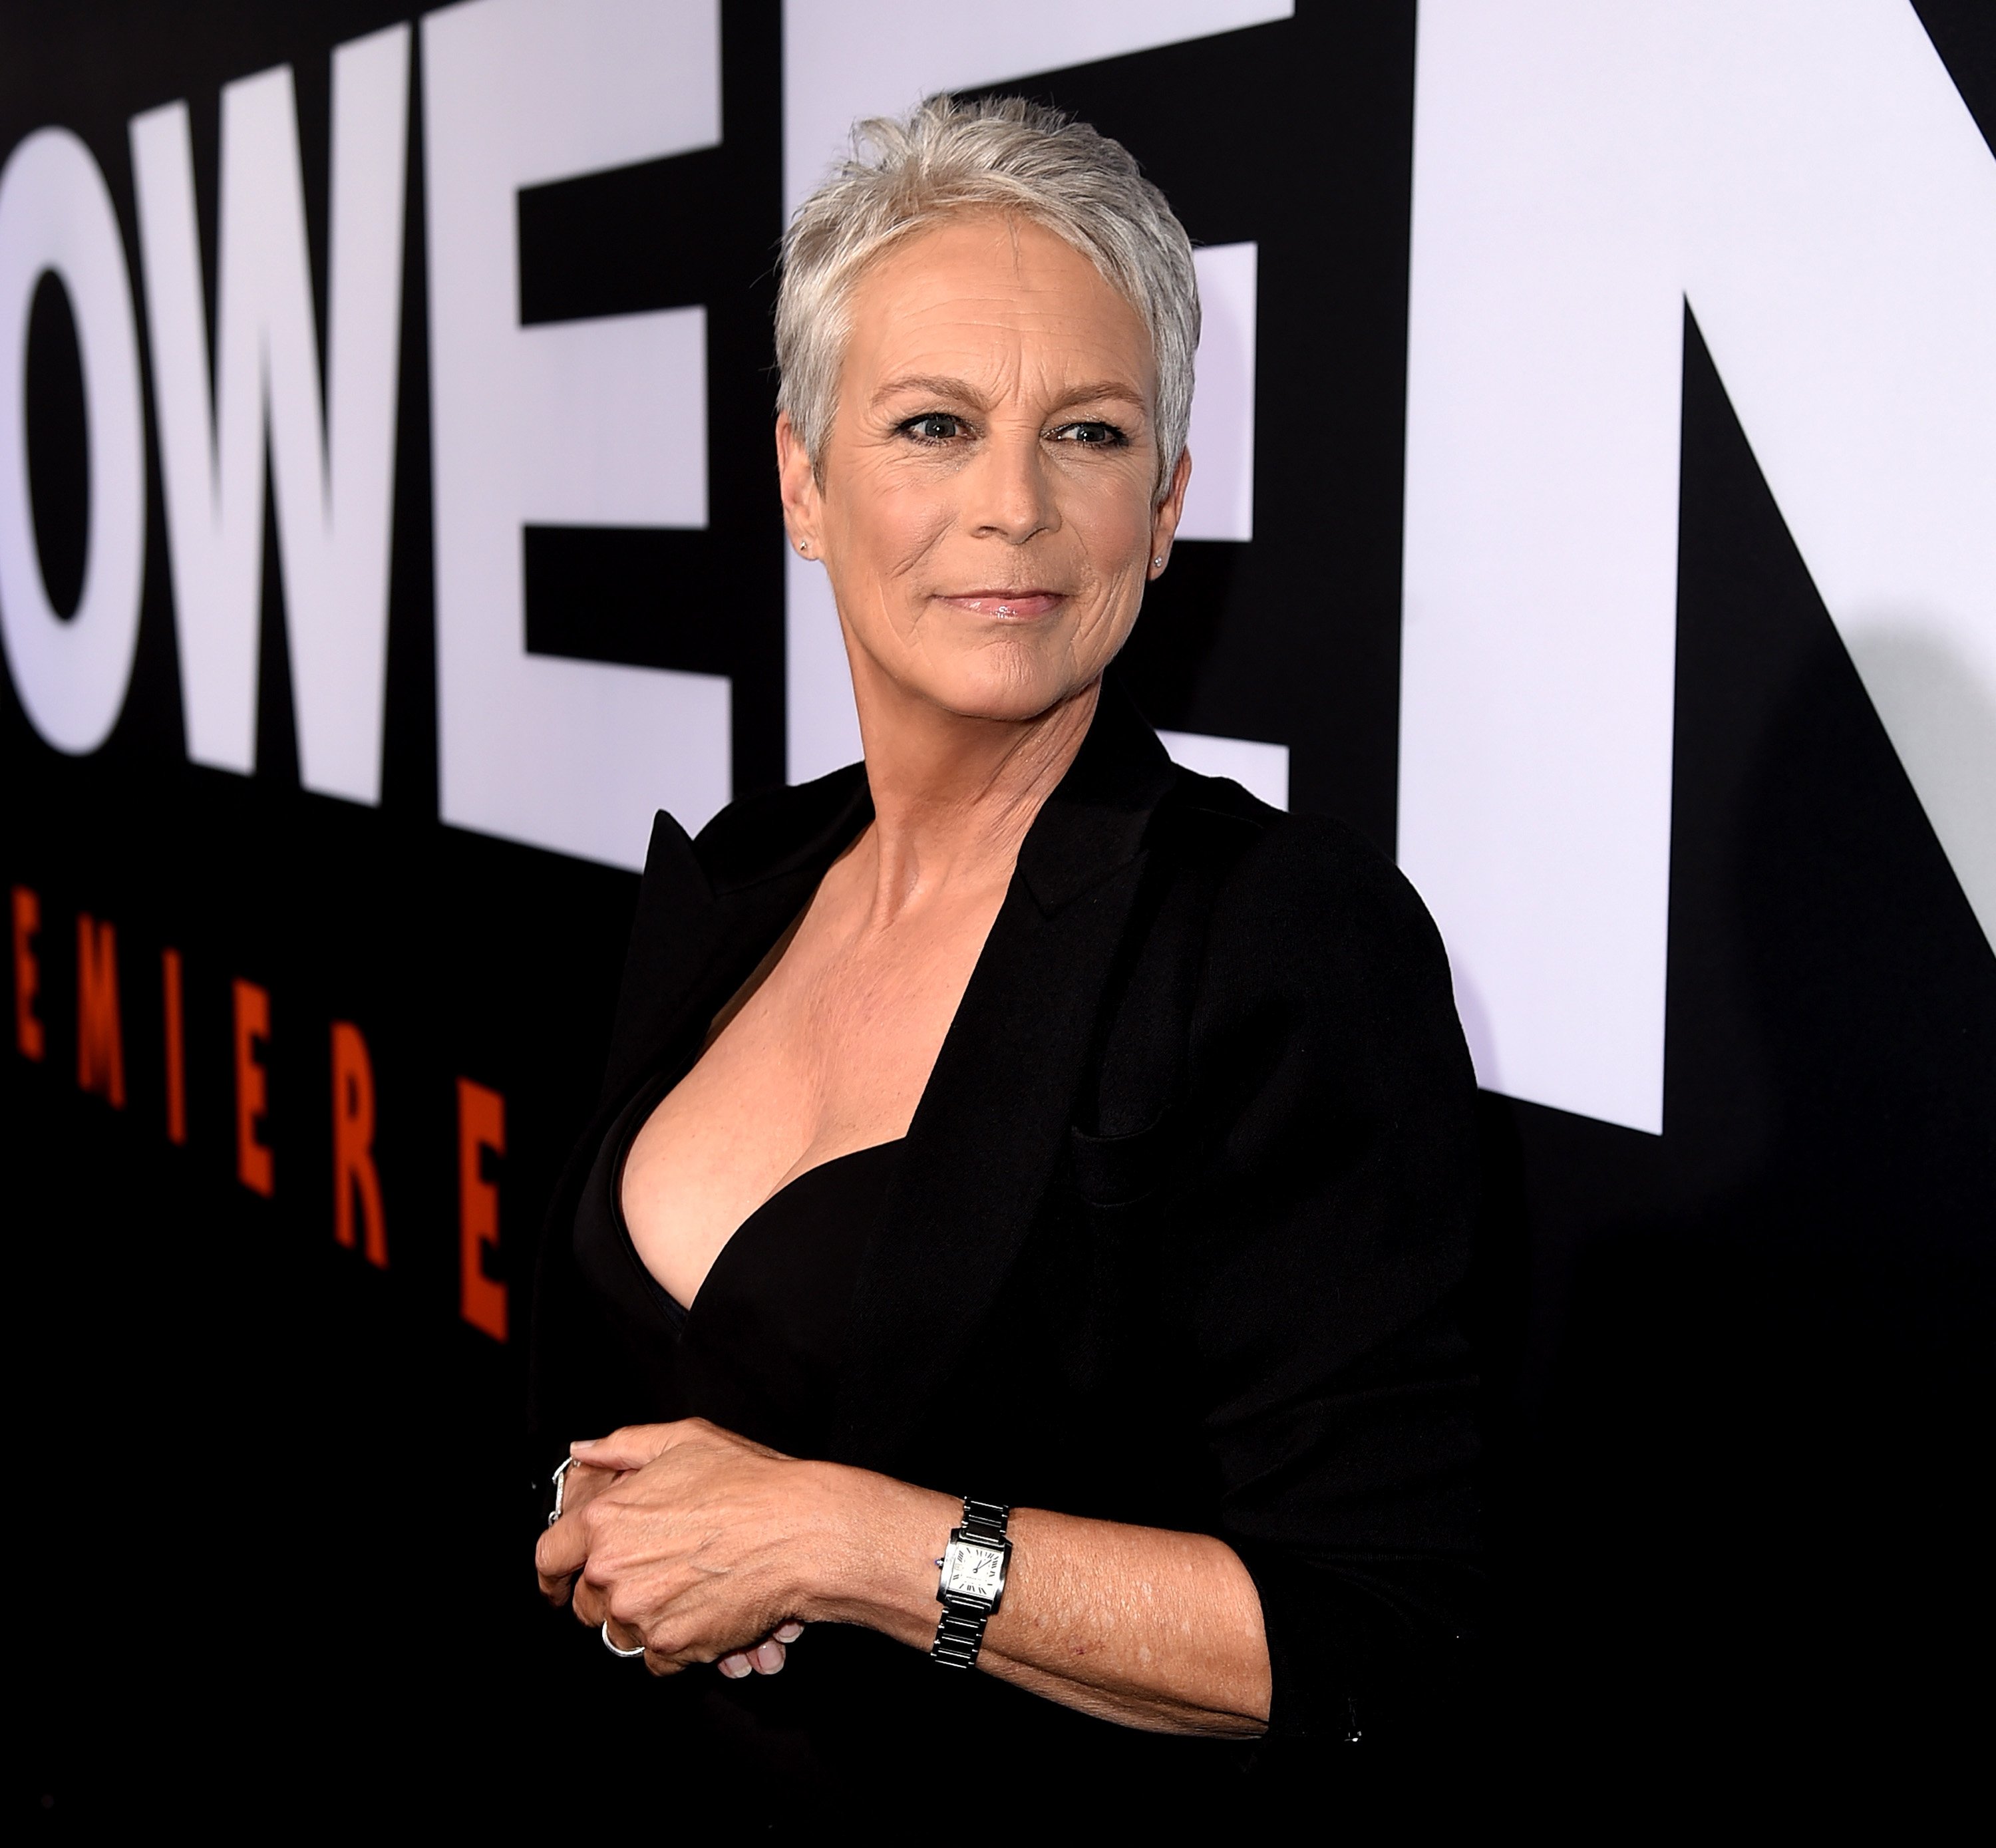 Jamie Lee Curtis at the premiere of Universal Pictures' "Halloween" at the TCL Chinese Theatre on October 17, 2018. | Photo: Getty Image